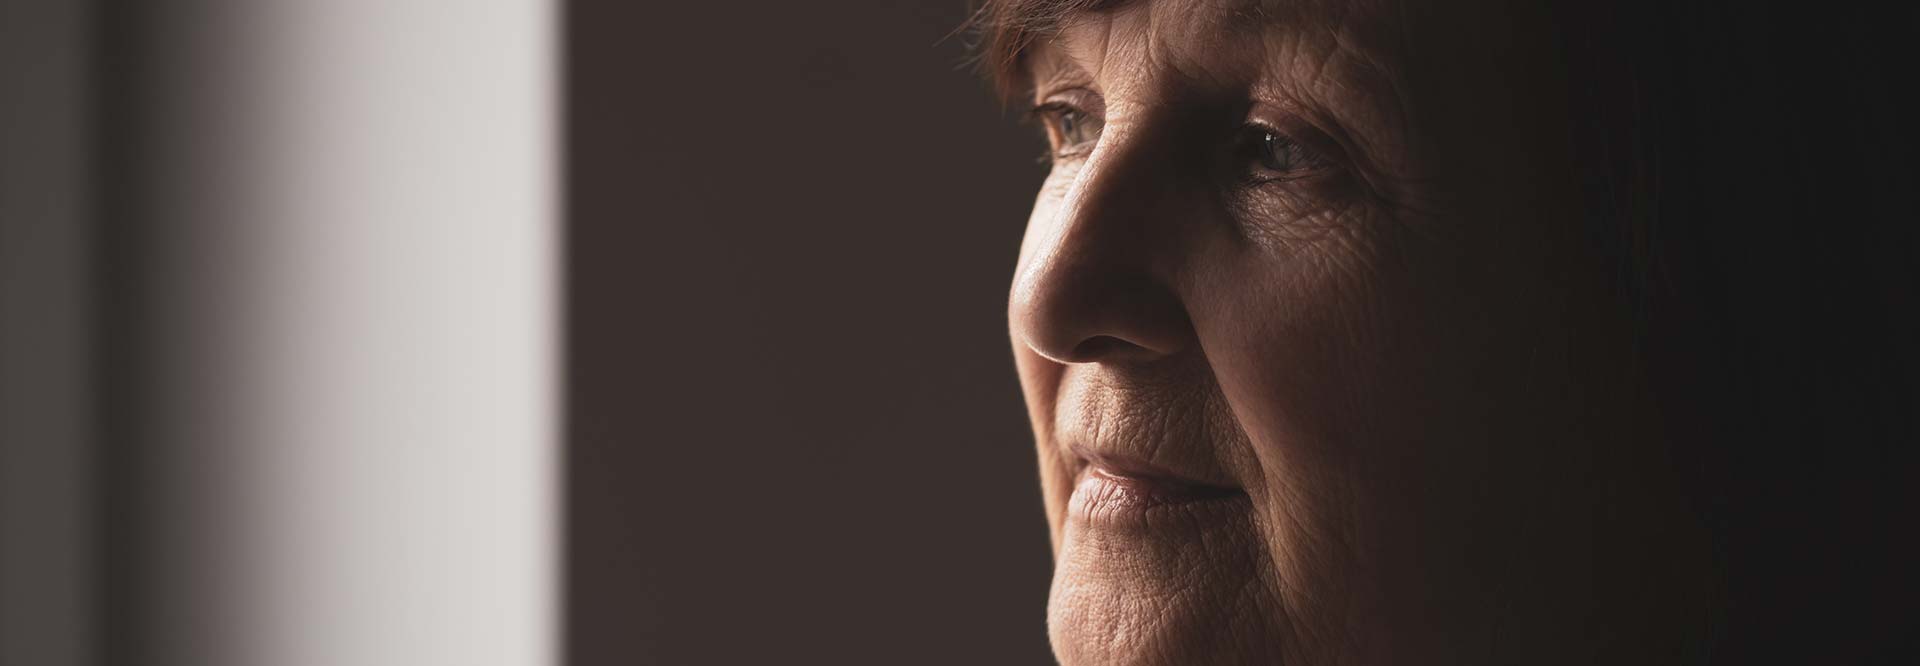 how to deal with elderly parent memory loss